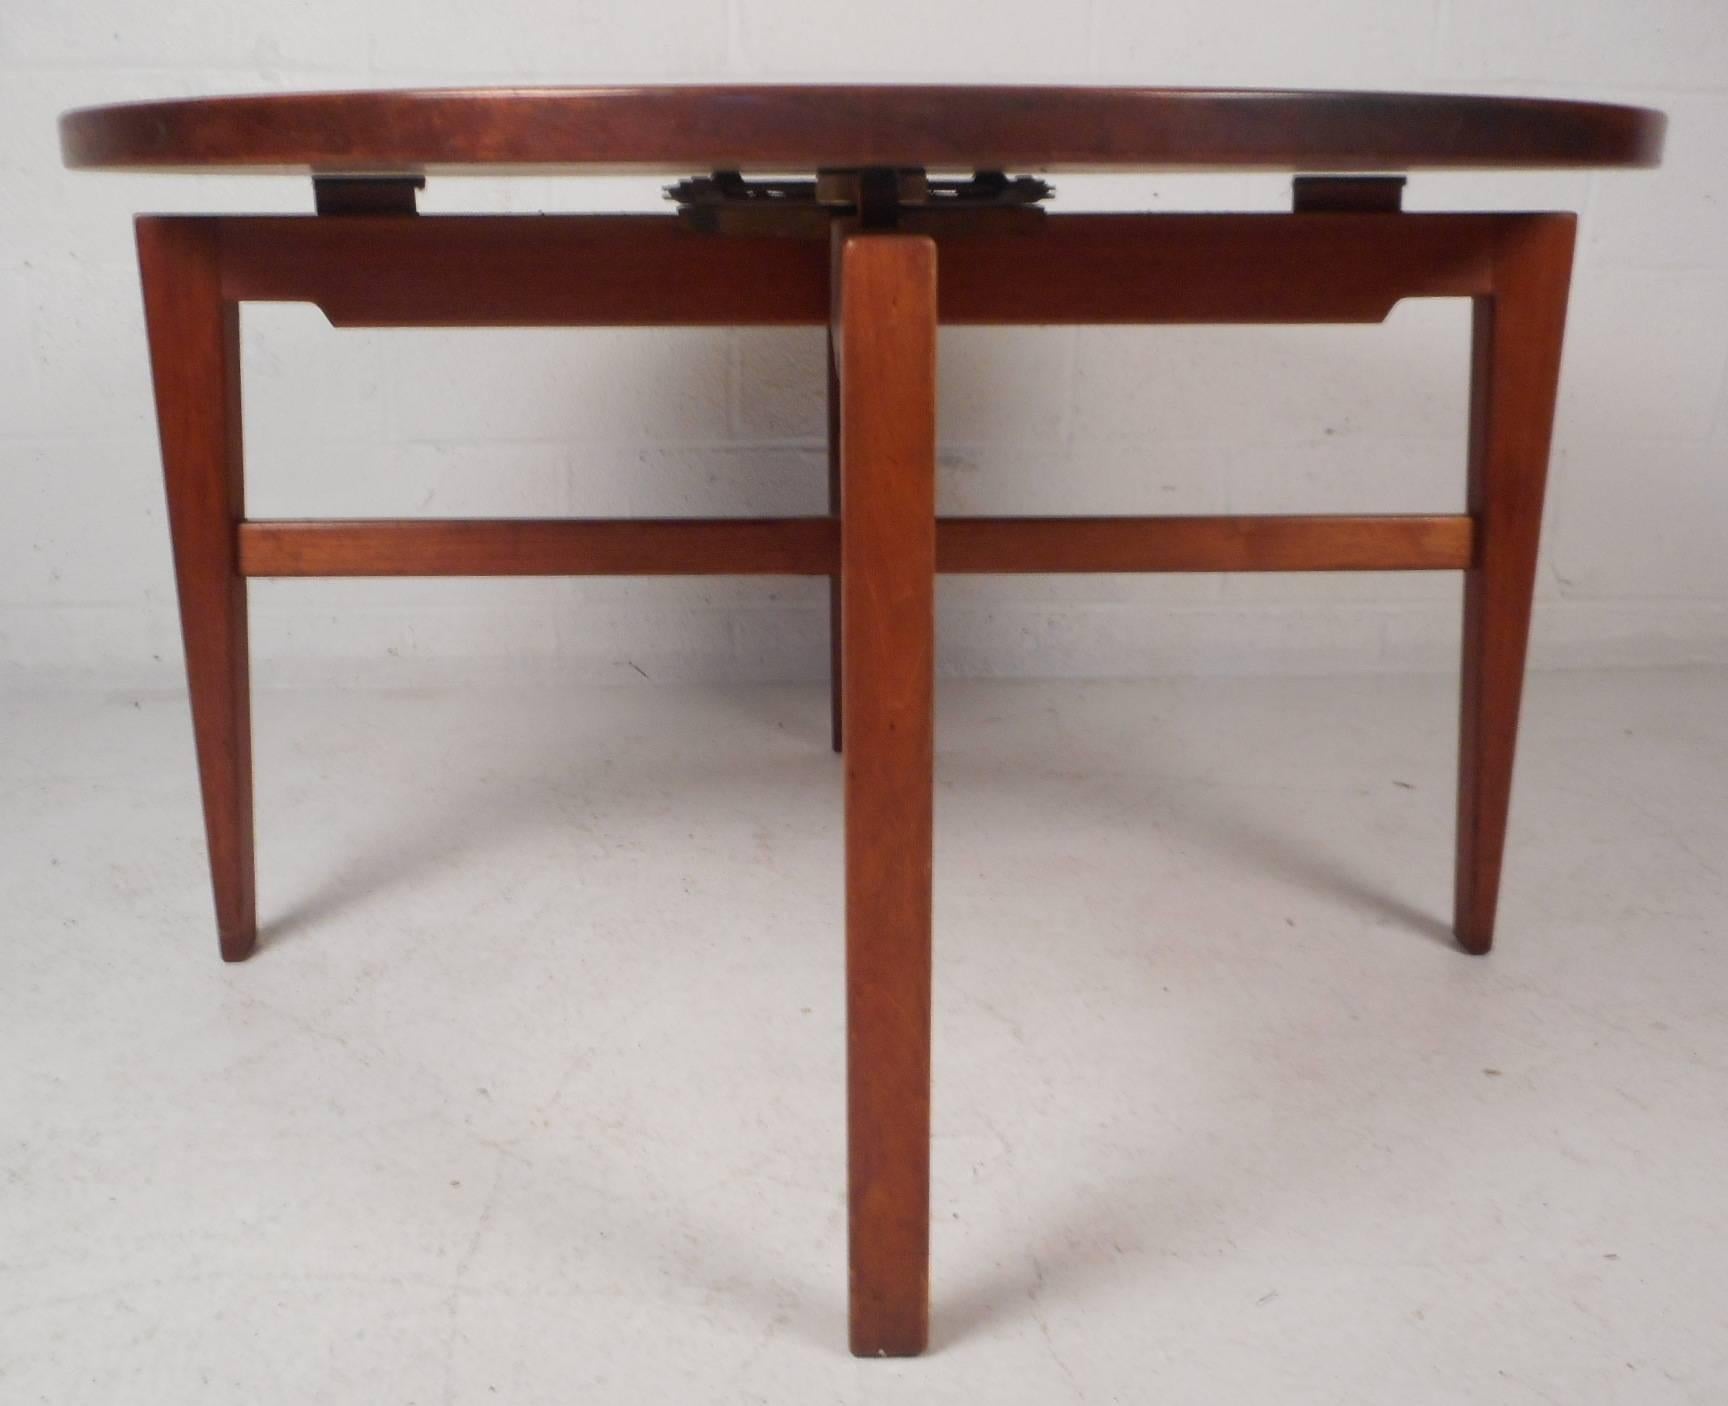 This beautiful vintage modern set features a "Lazy Susan" cocktail table that revolves and has a brake mechanism to hold it firmly in place. Stylish game table with long tapered legs and stretchers that intersect underneath to form an